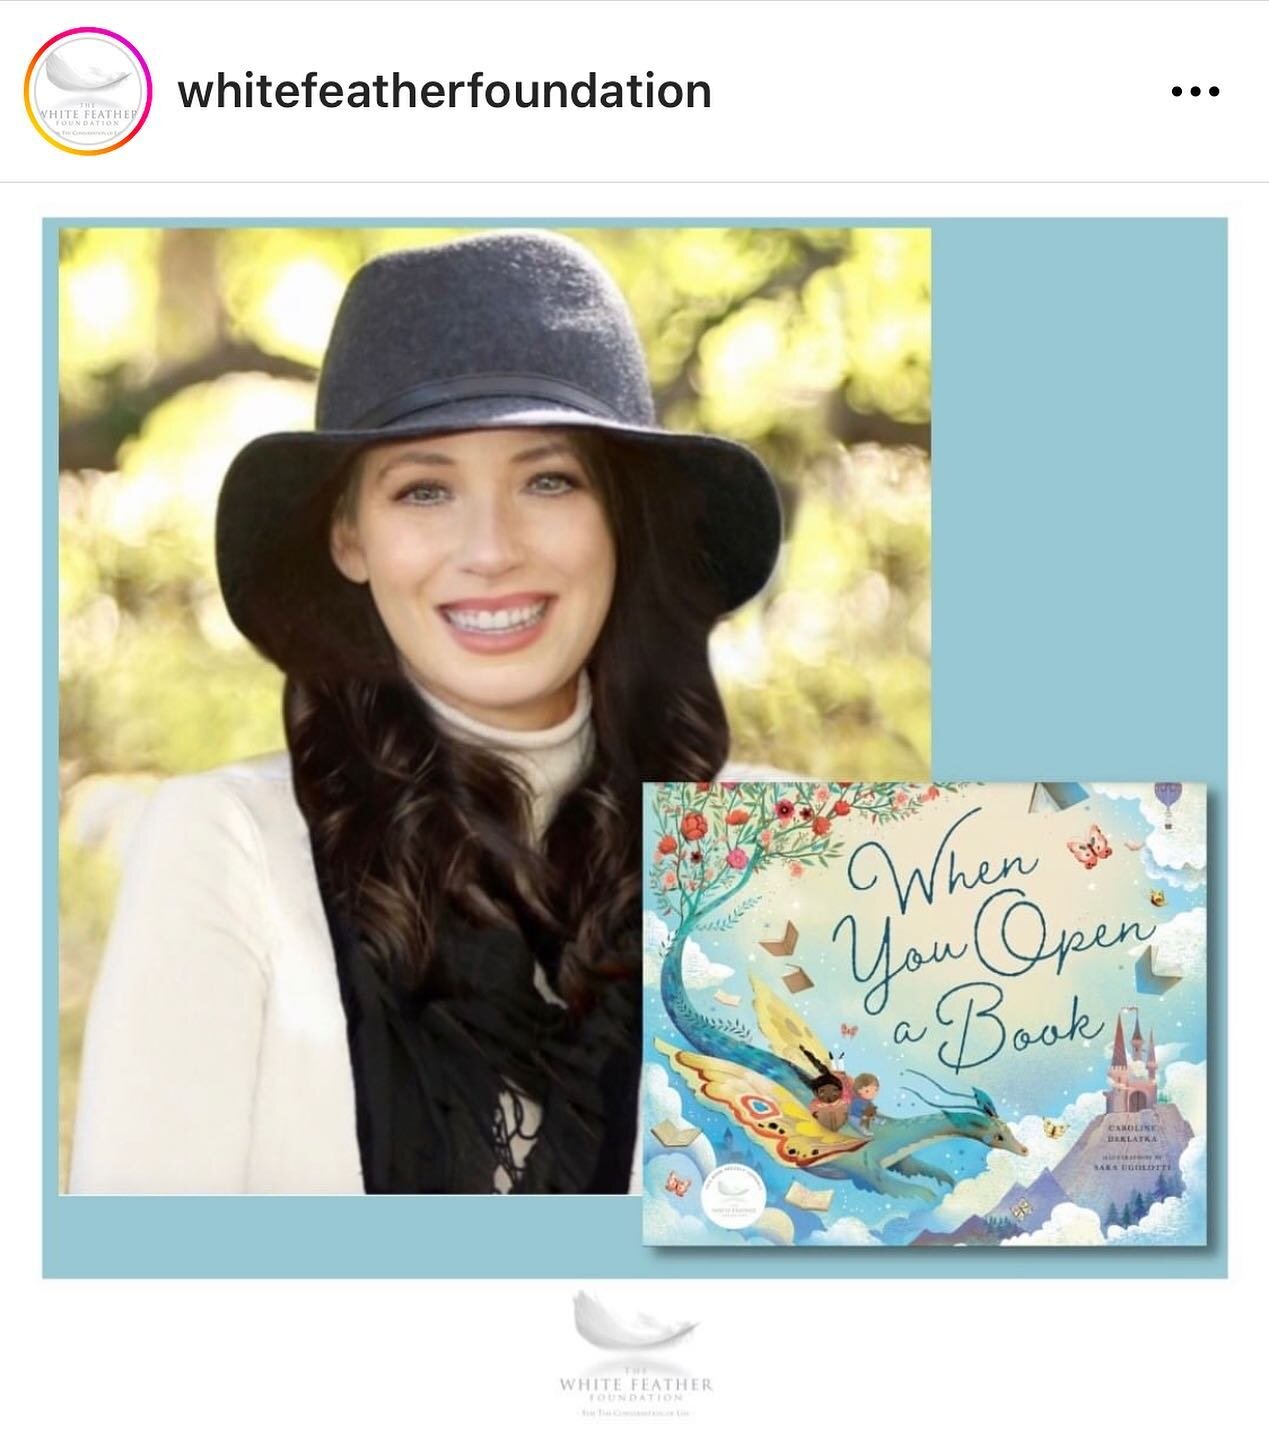 :) https://whitefeatherfoundation.com/news/peace-in-those-places-a-discussion-with-author-caroline-derlatka/